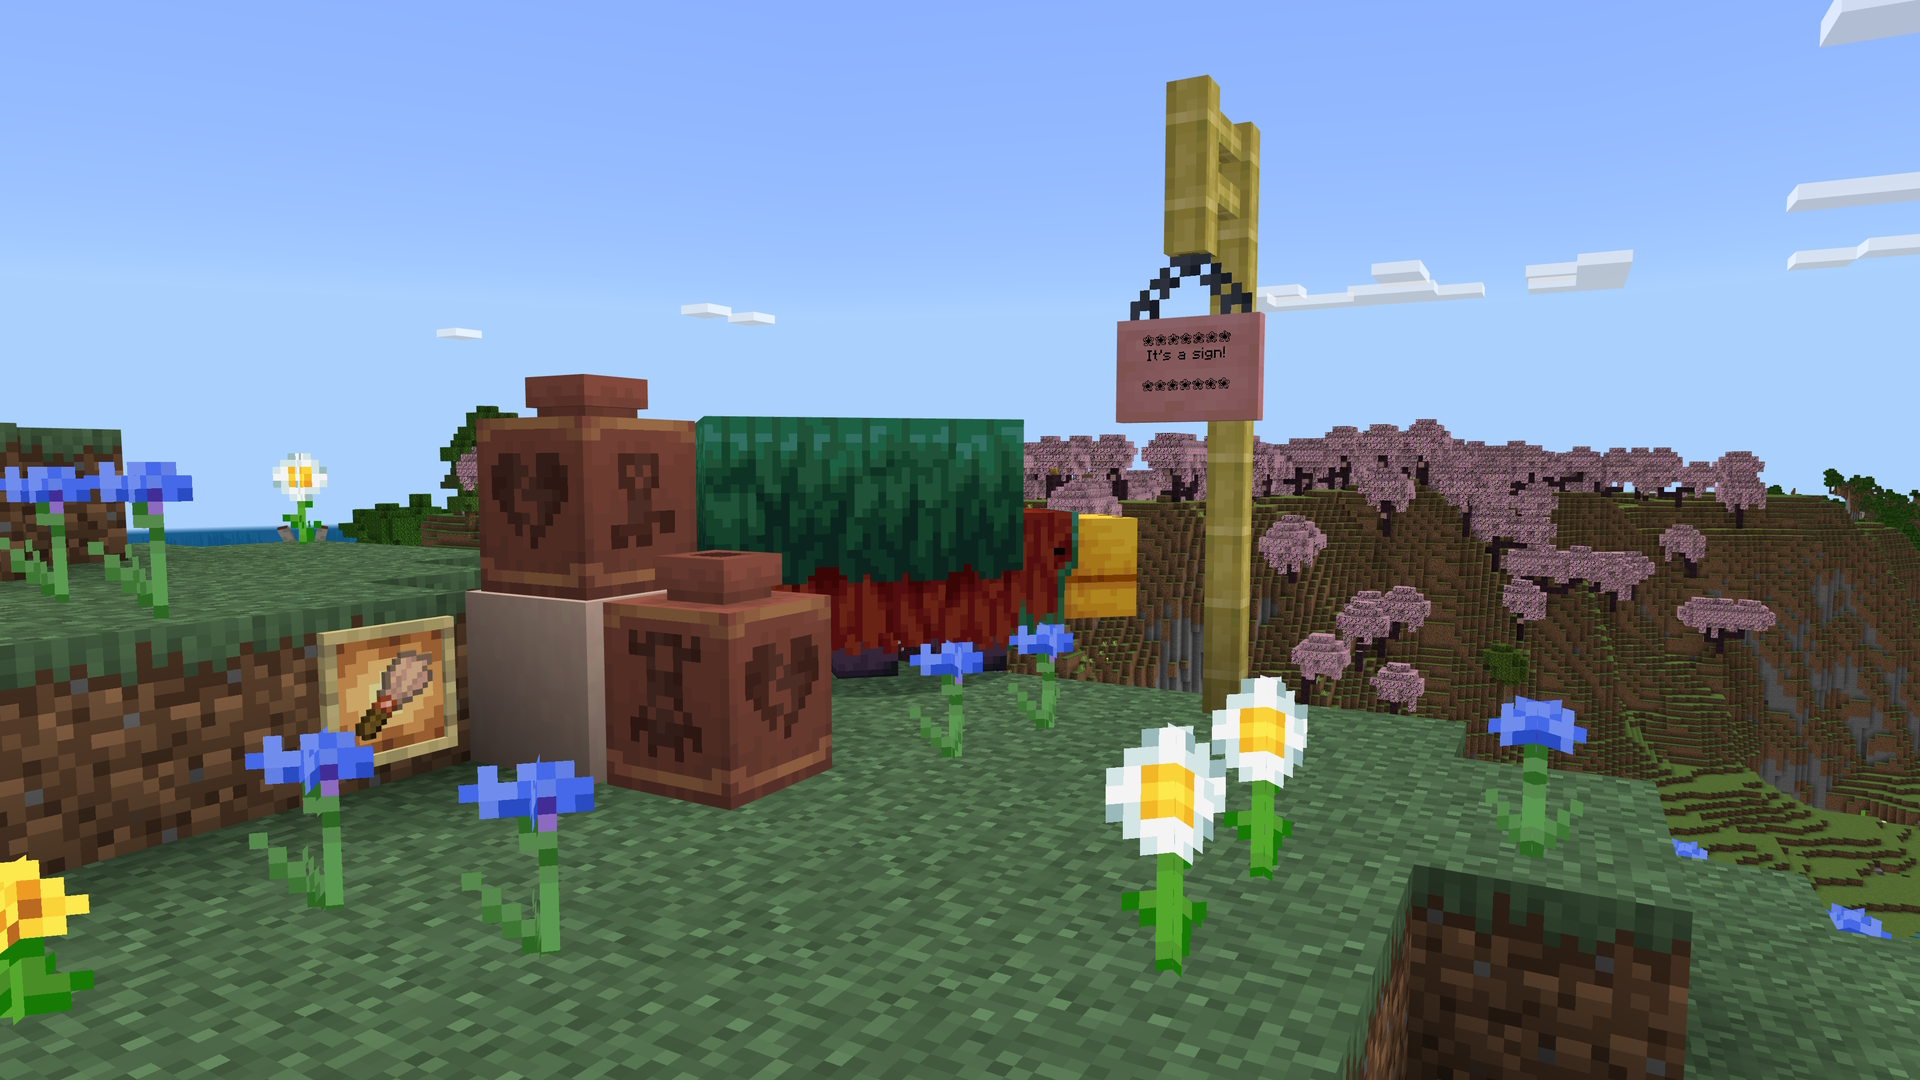 A Minecraft screenshot featuring a hanging sign, decorated pots, a sniffer mob, and cherry trees in the background.